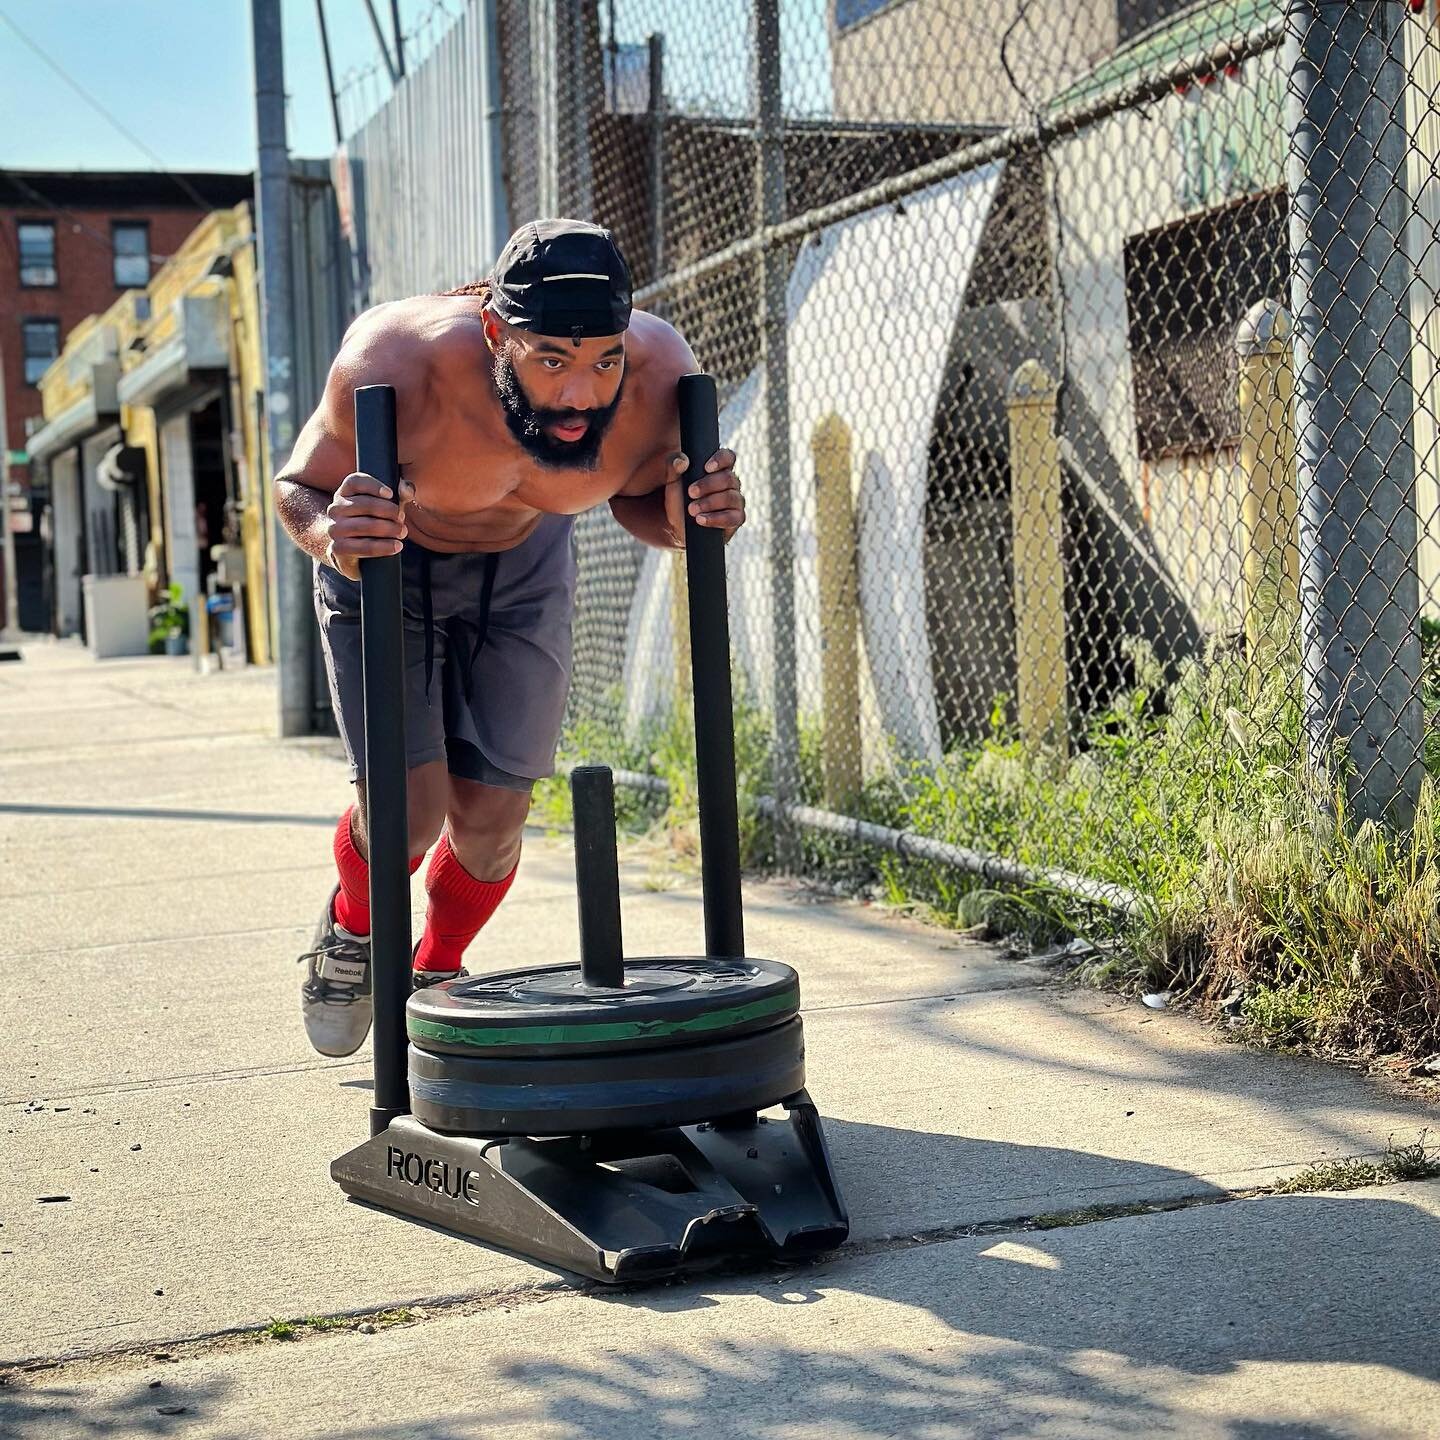 This weather though. ☀️ 🥵

Check the website or email info@deancrossfit.com to find out how to drop in to a class or join the Dean family!

#spring #workout #fitfam #fitness #fitnessmotivation #gym #brooklyn #brooklyngym #workoutmotivation #goals #c